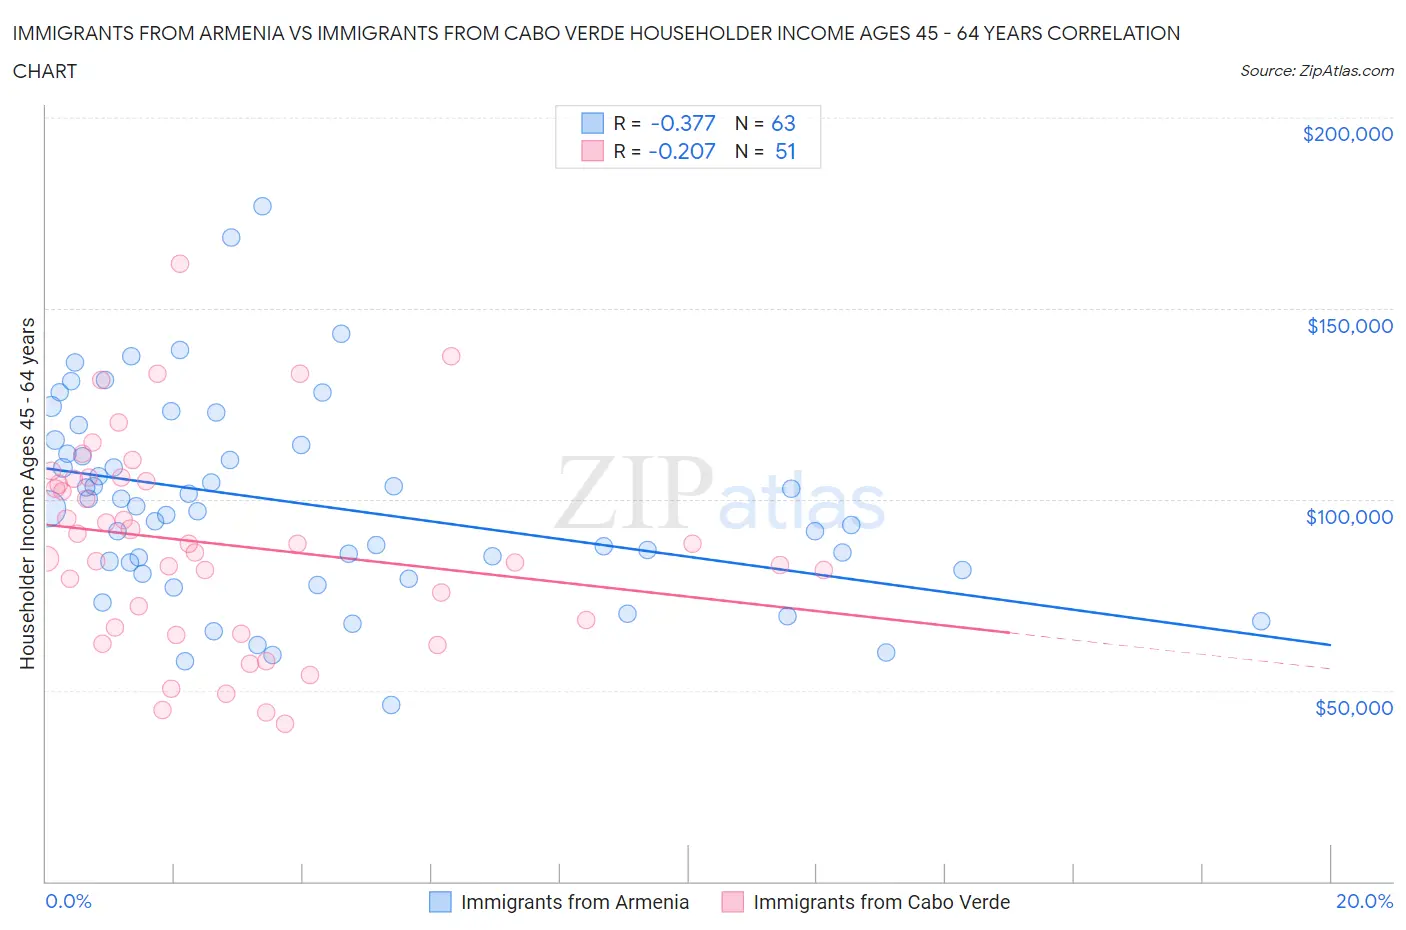 Immigrants from Armenia vs Immigrants from Cabo Verde Householder Income Ages 45 - 64 years